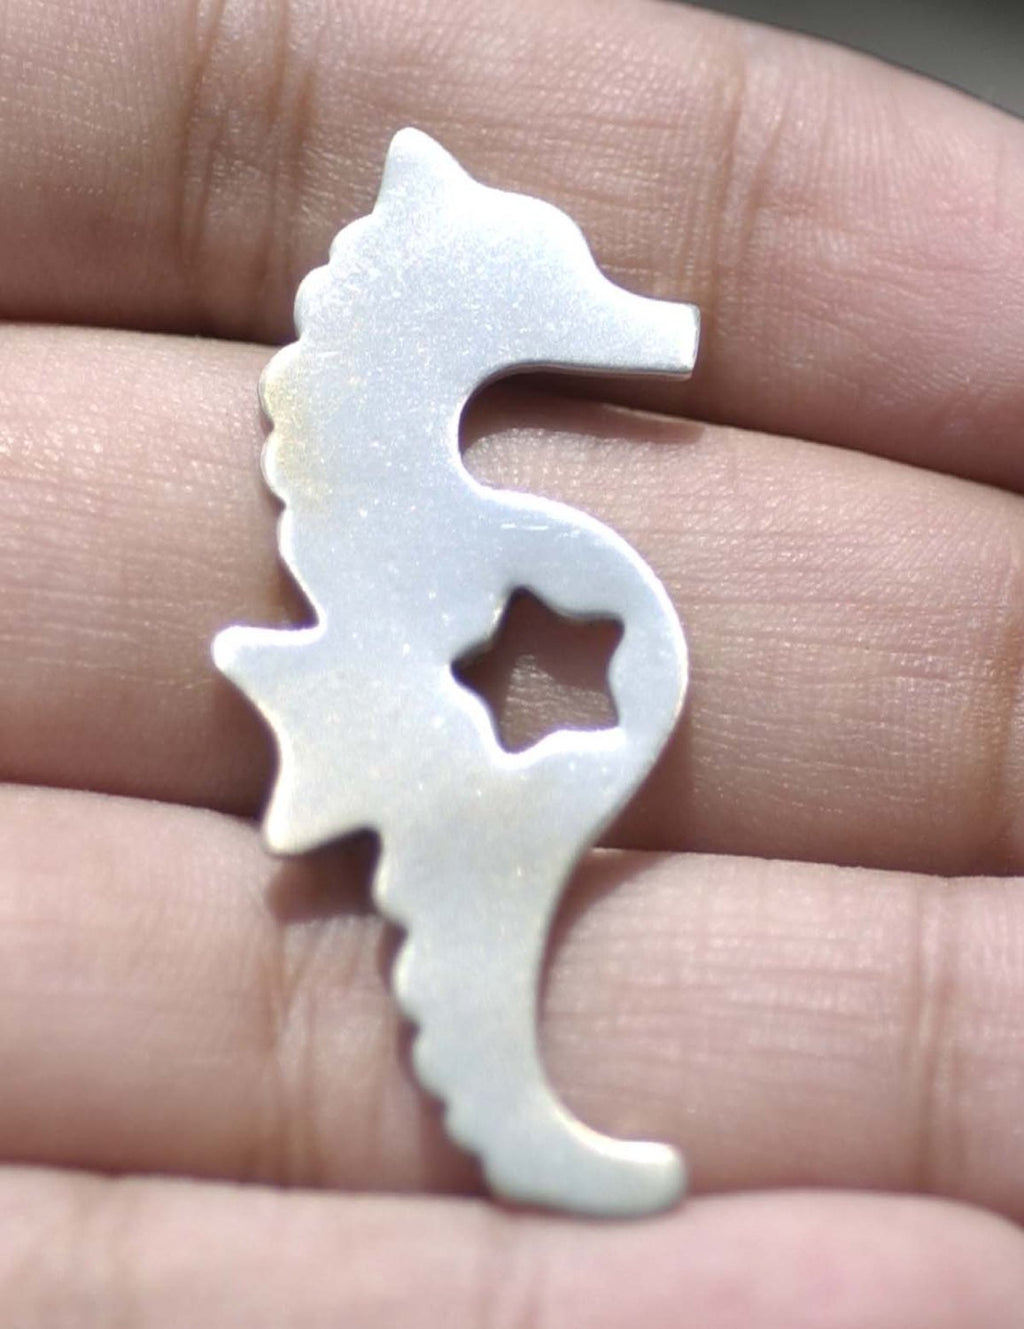 Nickel Silver Seahorse with Star Blanks Cutout Shape Charms for Stamping Texturing 100% Nickel Silver Blank